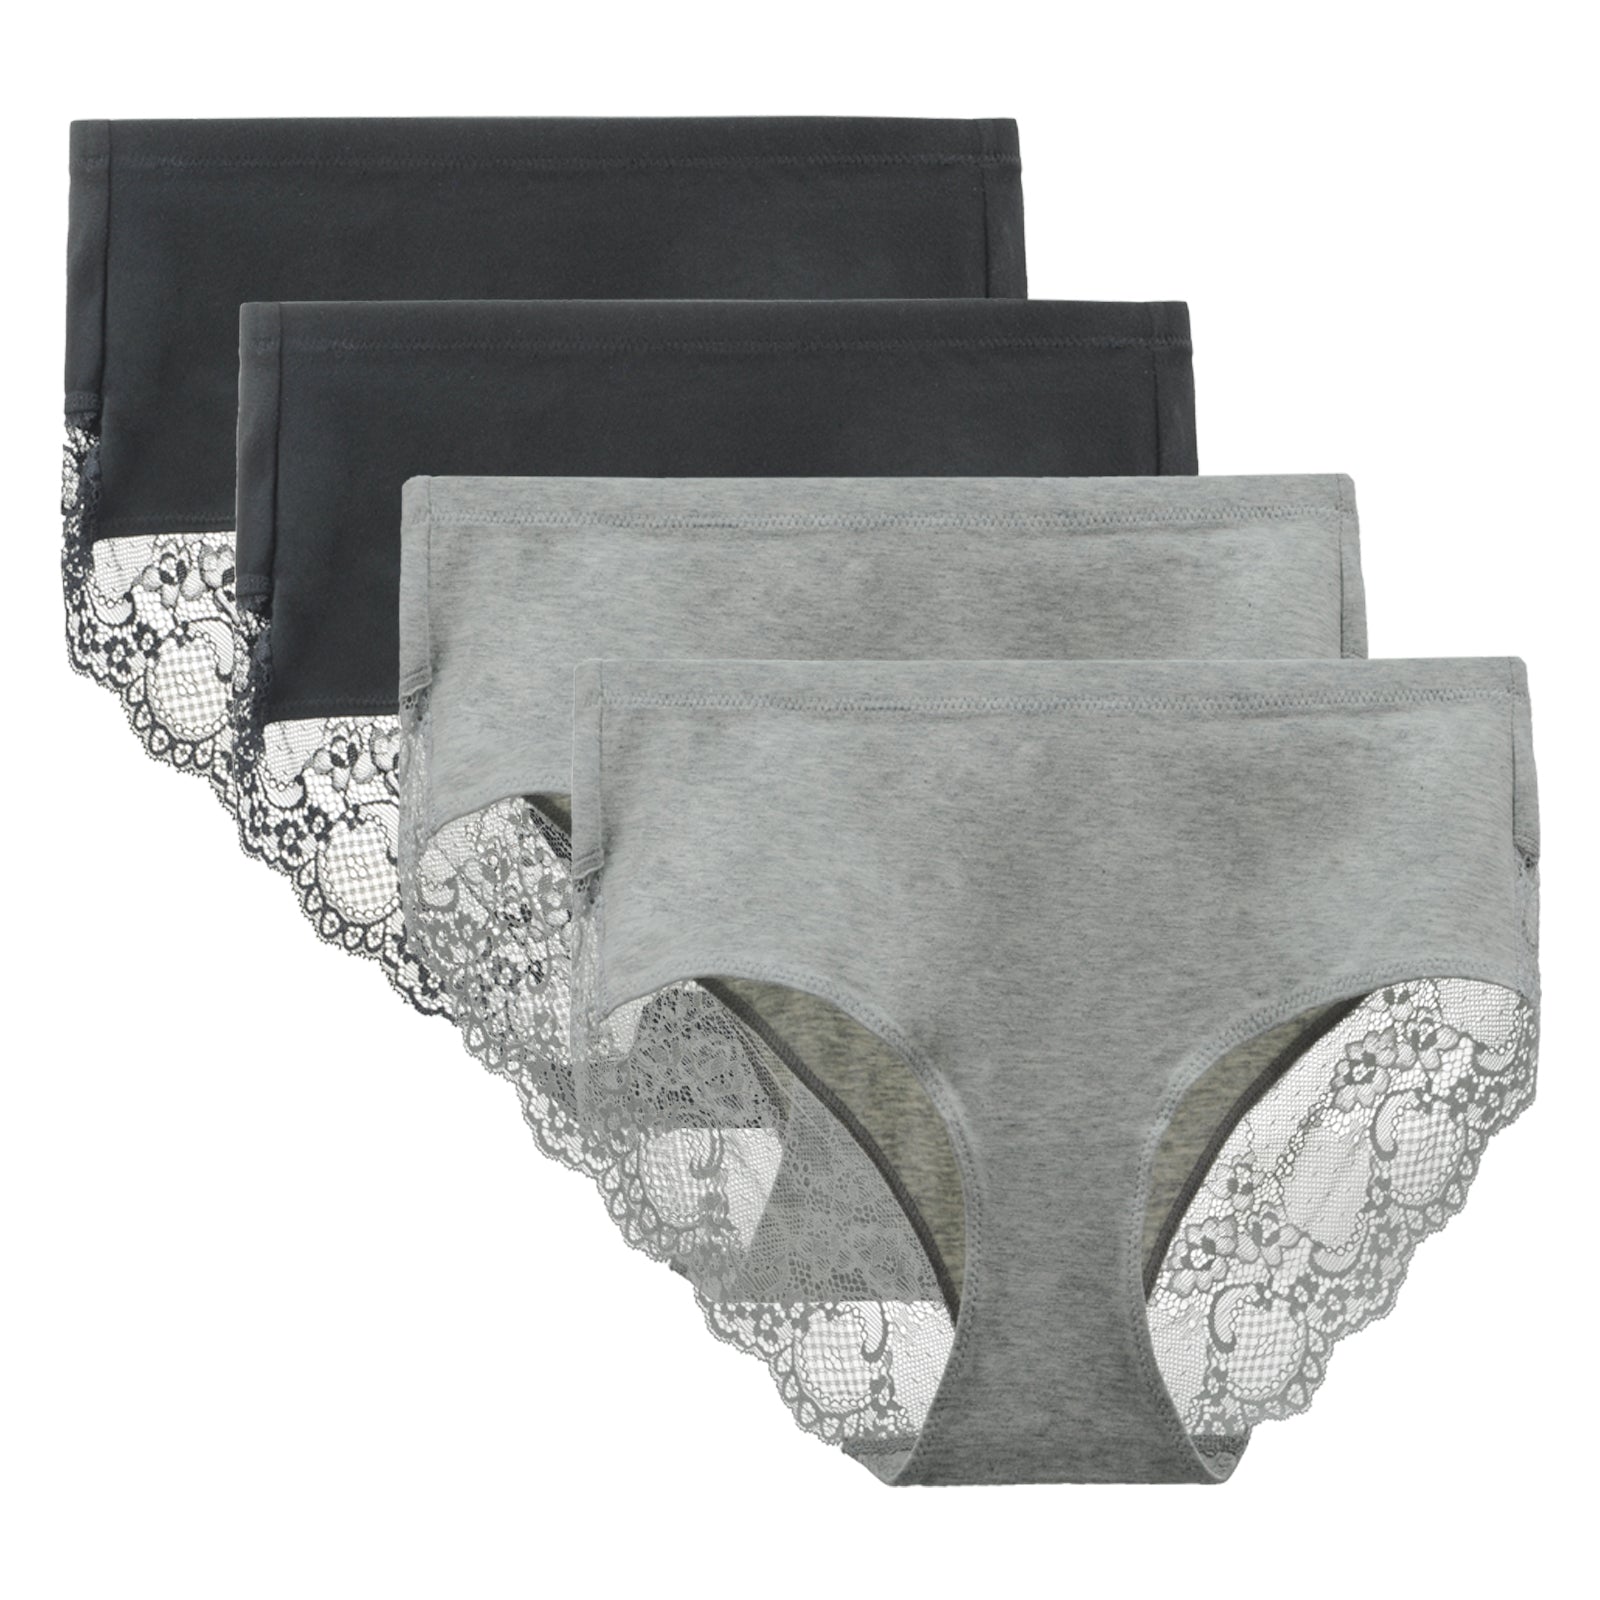 Buy Monochrome Short Cotton and Lace Knickers 4 Pack from Next USA